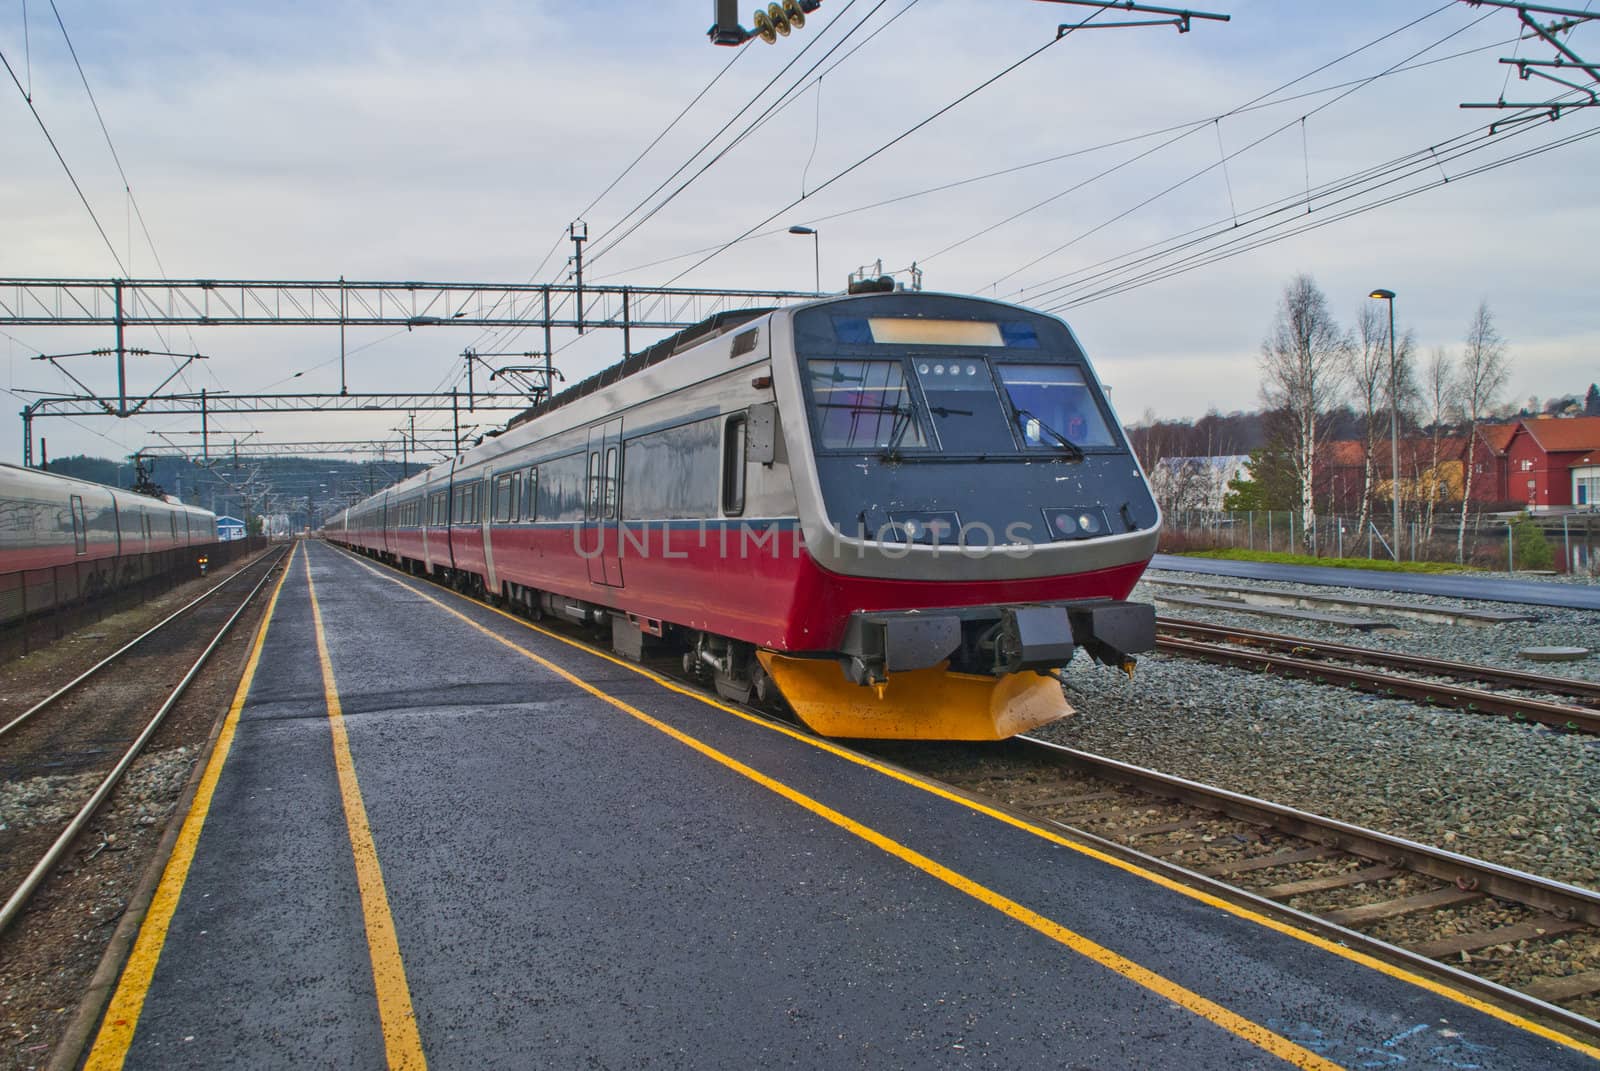 picture is shot in november 2012 at halden railroad station and shows nsb (in norwegian:  norges statsbaner) class 70 which is a four-carriage electric multiple unit, the train is used by nsb for medium distance trains around oslo, most in the dovre line between oslo and lillehammer / dombås and on the vestfold line